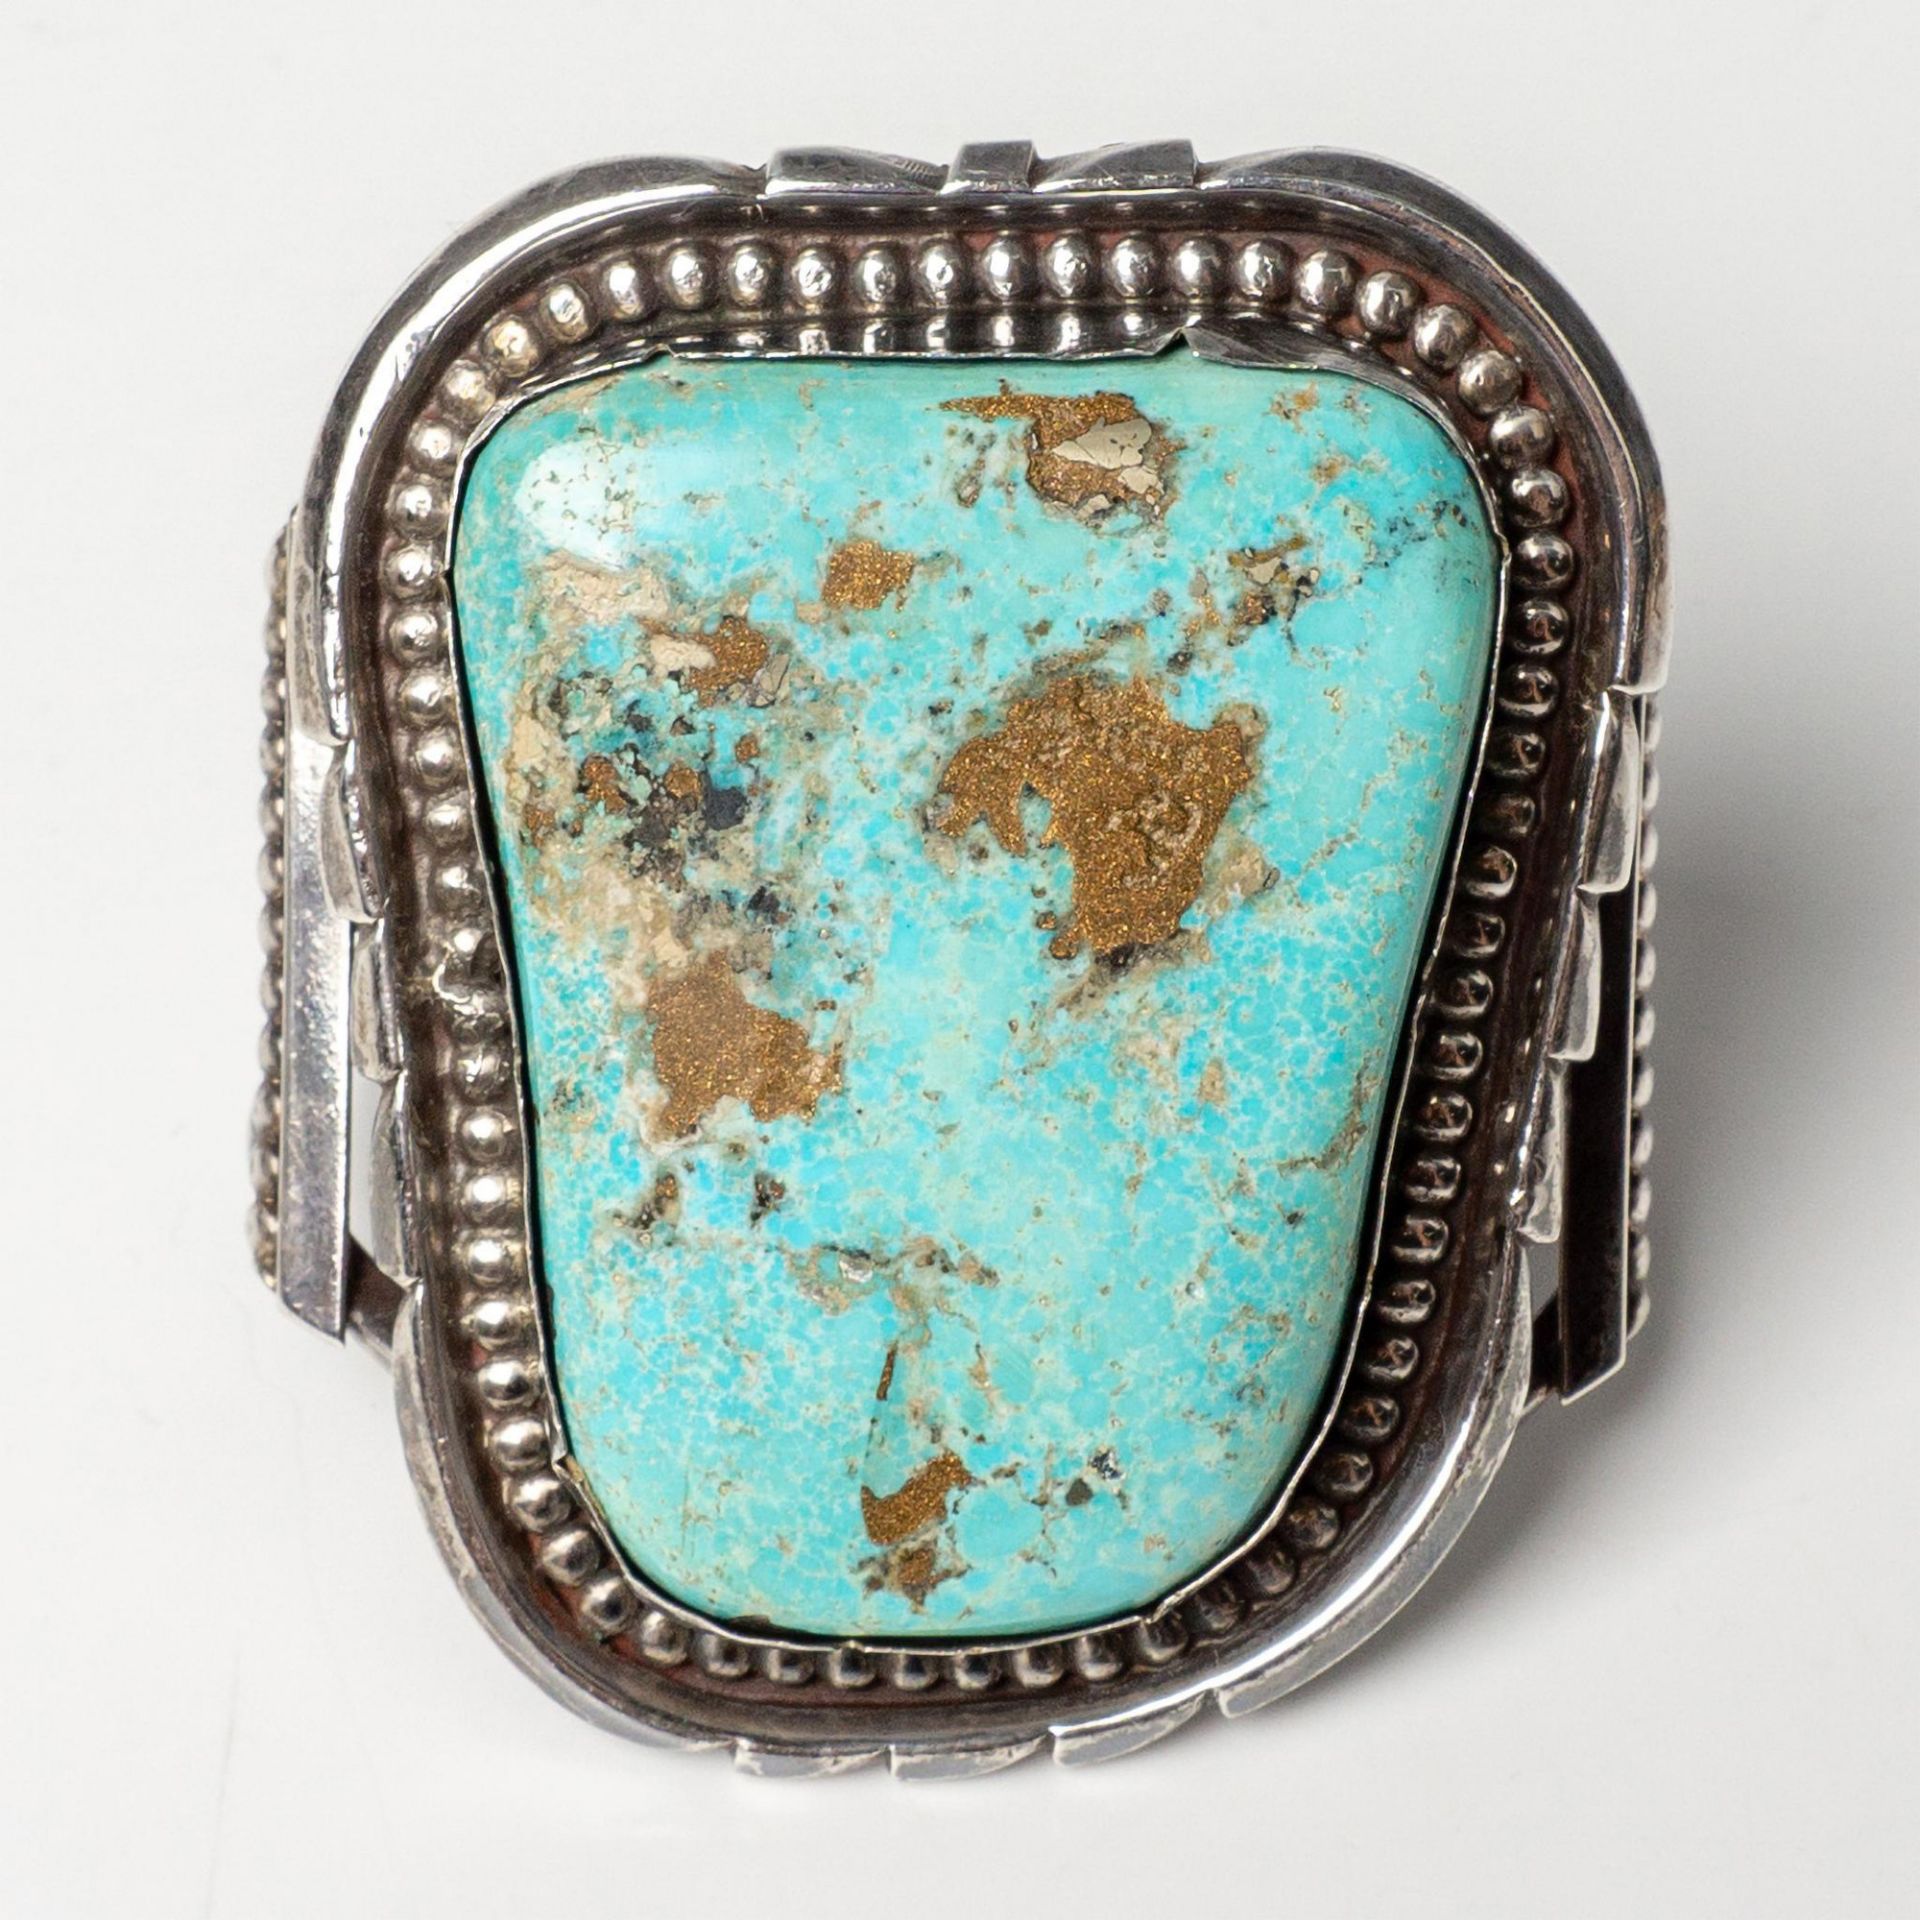 Chunky Native American Sterling & Turquoise Cuff Bracelet - Image 2 of 5